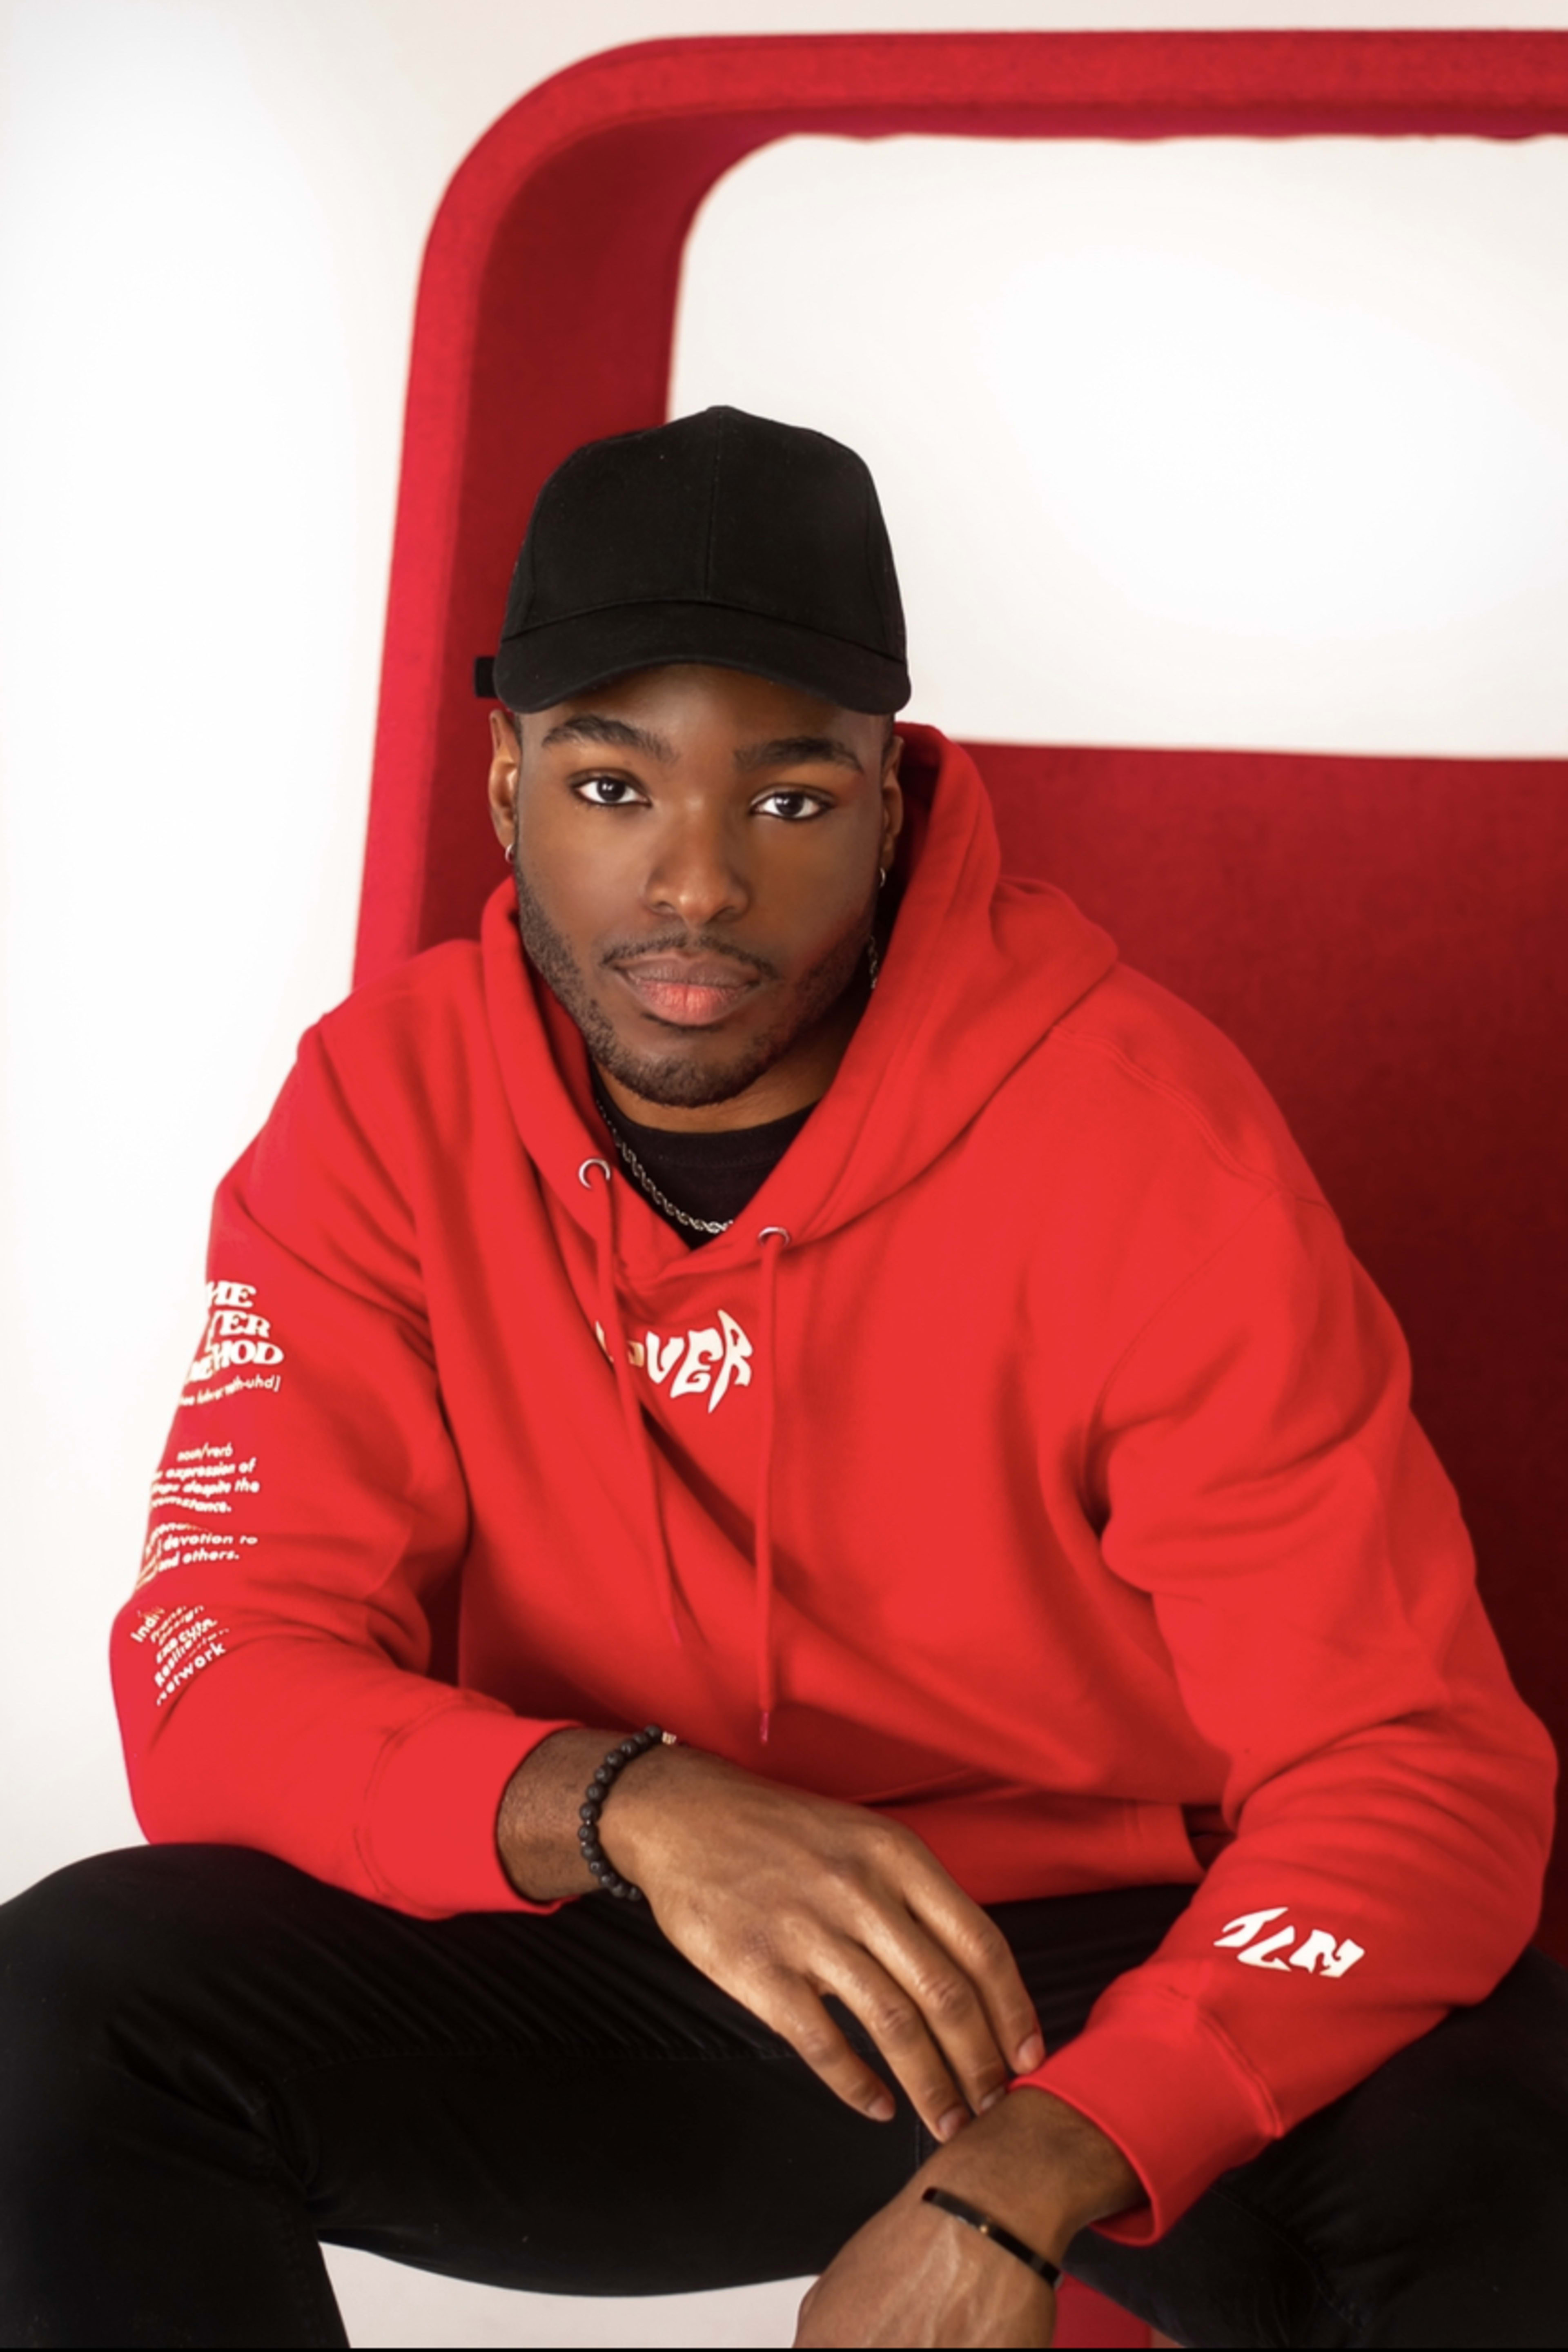 A man in a red hoodie posing for a photoshoot on a red chair.